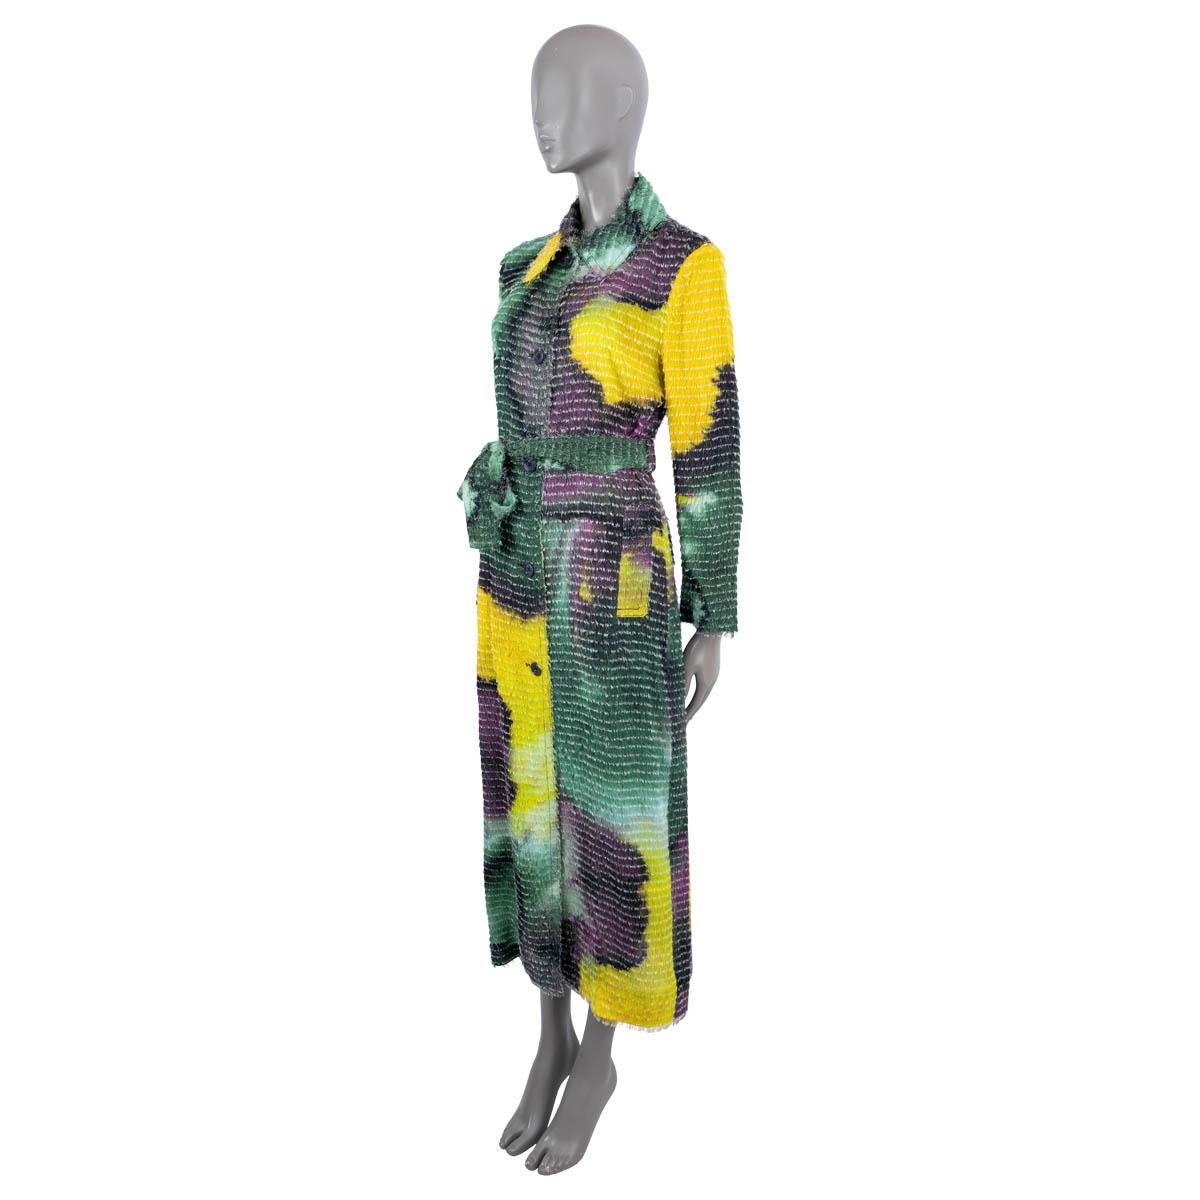 100% authentic Dries van Noten 2022 Rolano fringed thin long coat. The design features a buttoned front and a slightly loose fit made from green, yellow, lime and purple viscose (81%) and silk (19%) crepe patterned with a tie-dyed motif and has a